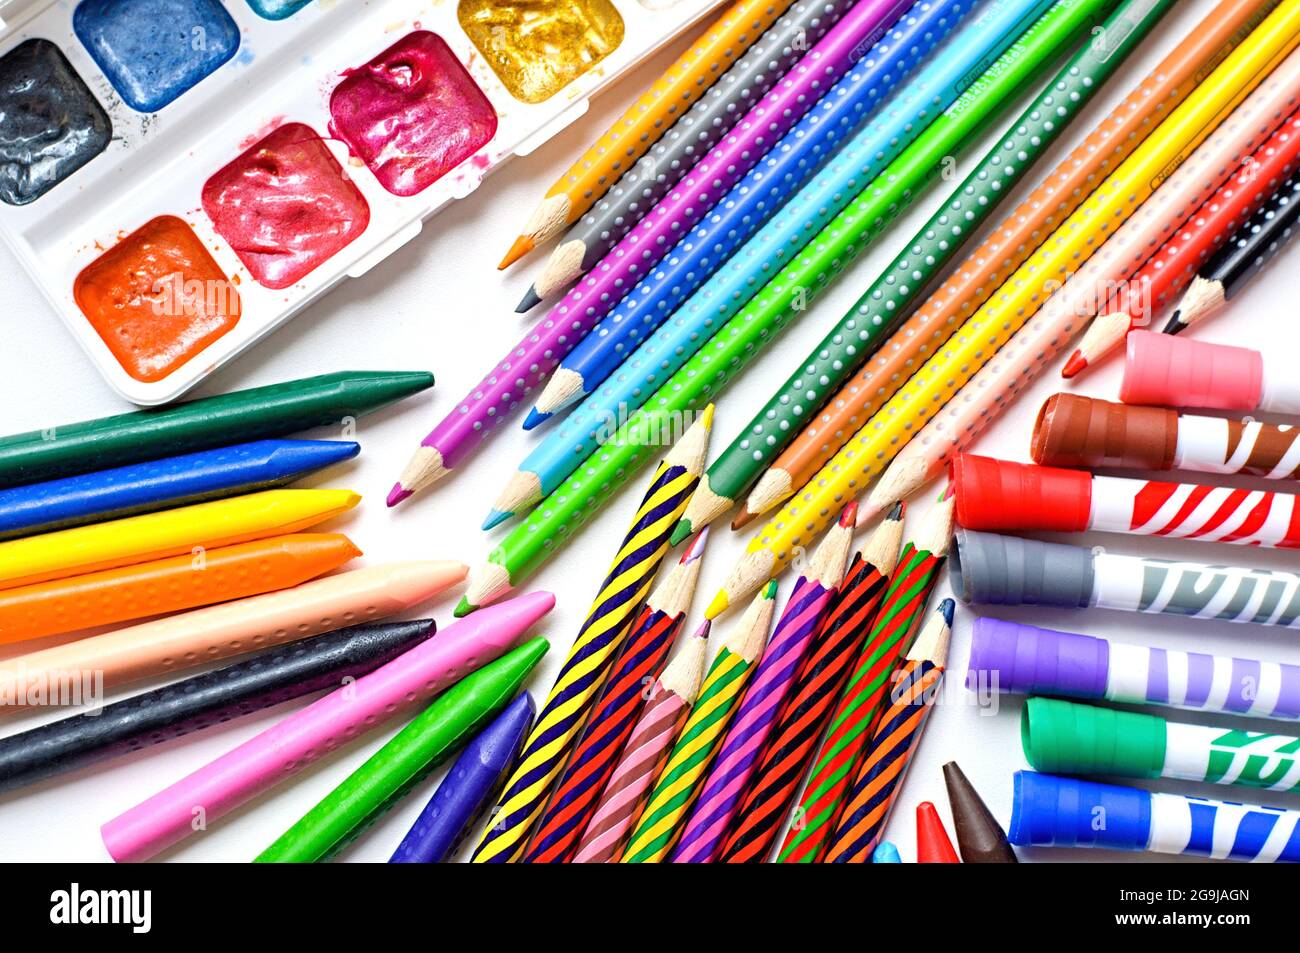 https://c8.alamy.com/comp/2G9JAGN/subjects-for-drawing-colored-pencils-crayons-markers-and-paints-on-white-background-2G9JAGN.jpg